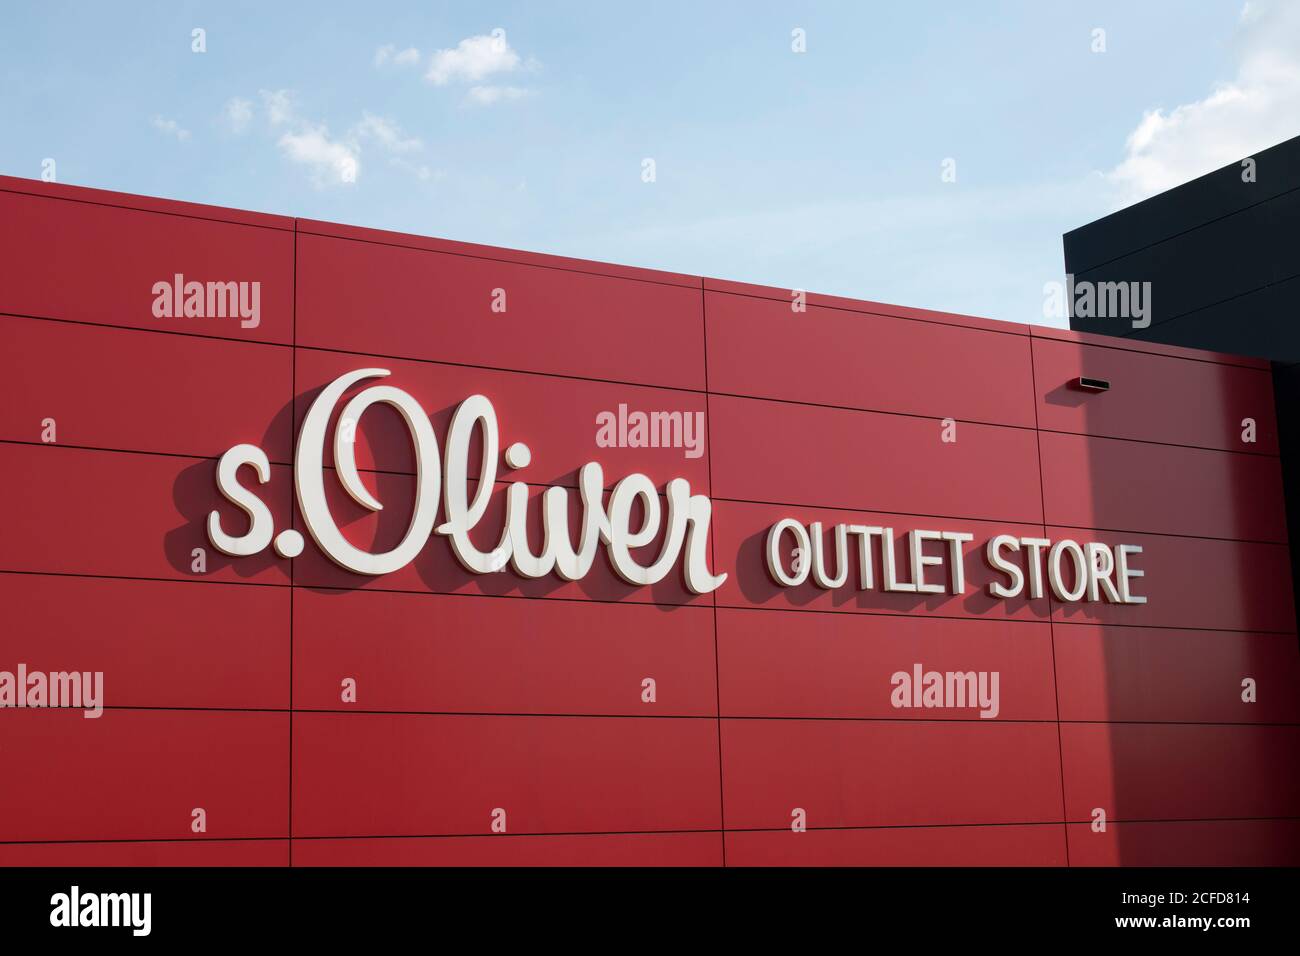 Outlet center in Rottendorf near Würzburg, Comma, - s.Oliver Stock Photo